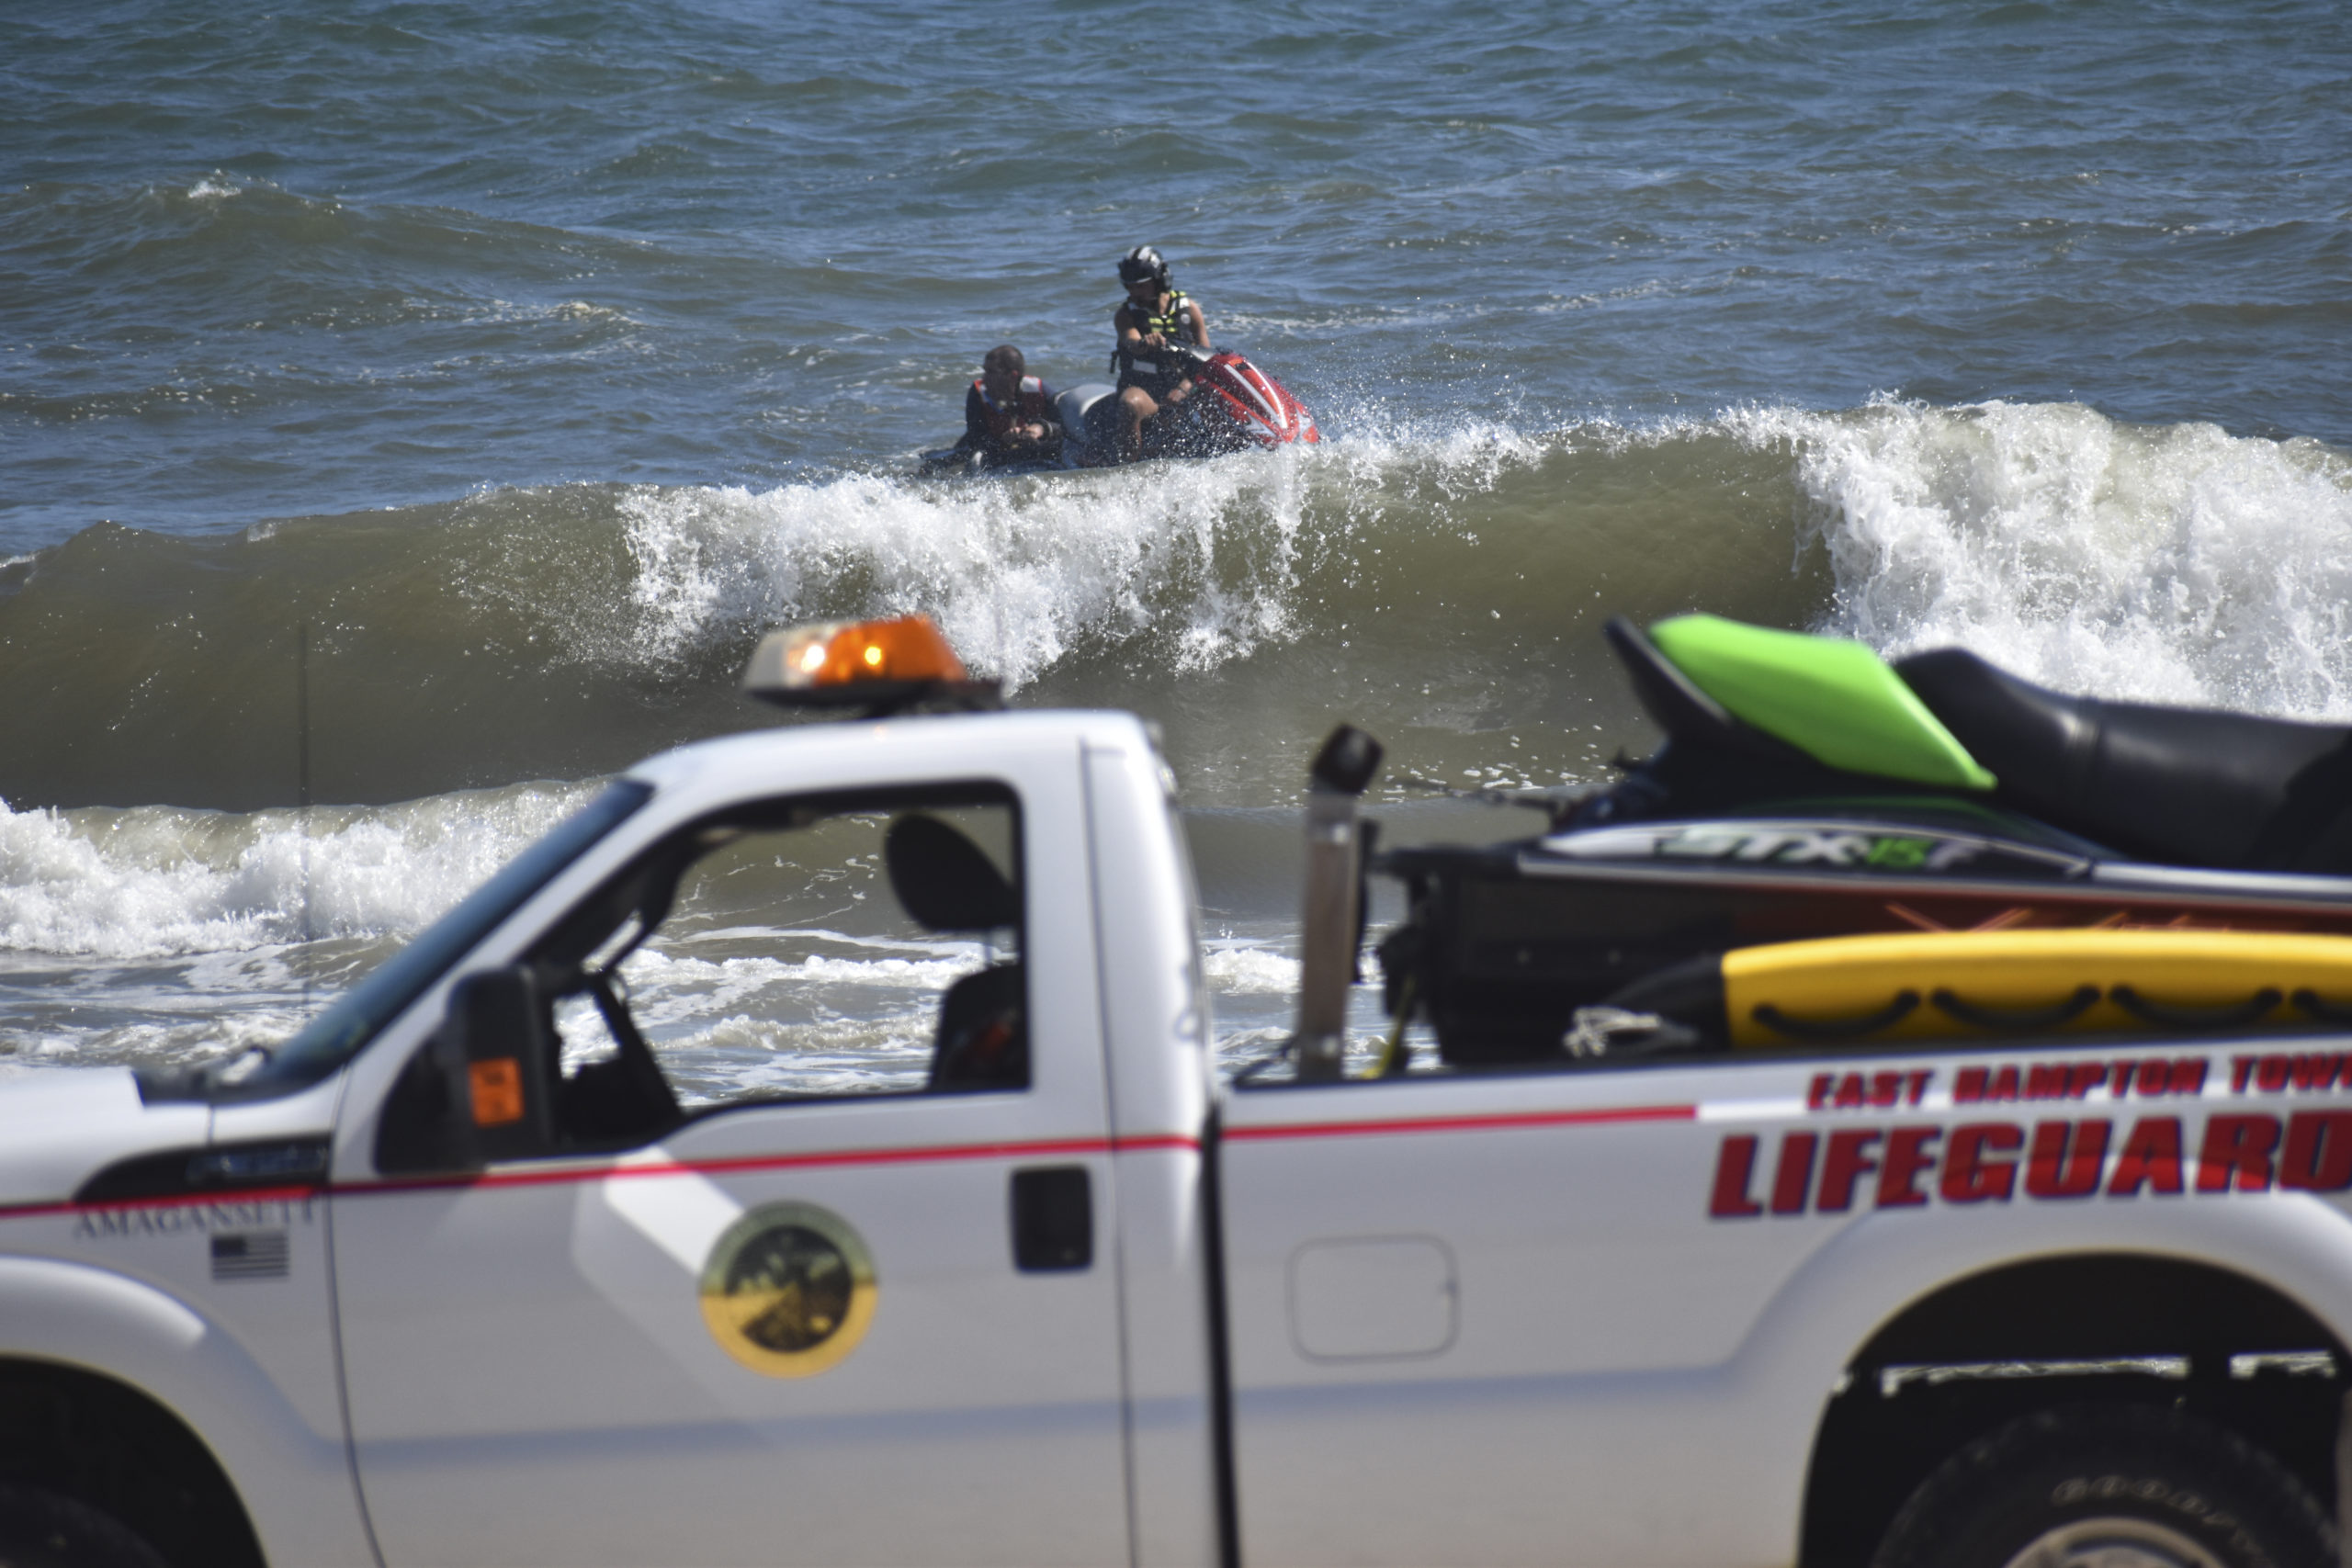 Members of the East Hampton Volunteer Ocean Rescue, police and the U.S. Coast Guard continue to search for a missing swimmer on the beach between Napeague State Park and Hither Hills Tuesday afternoon. GAVIN MENU